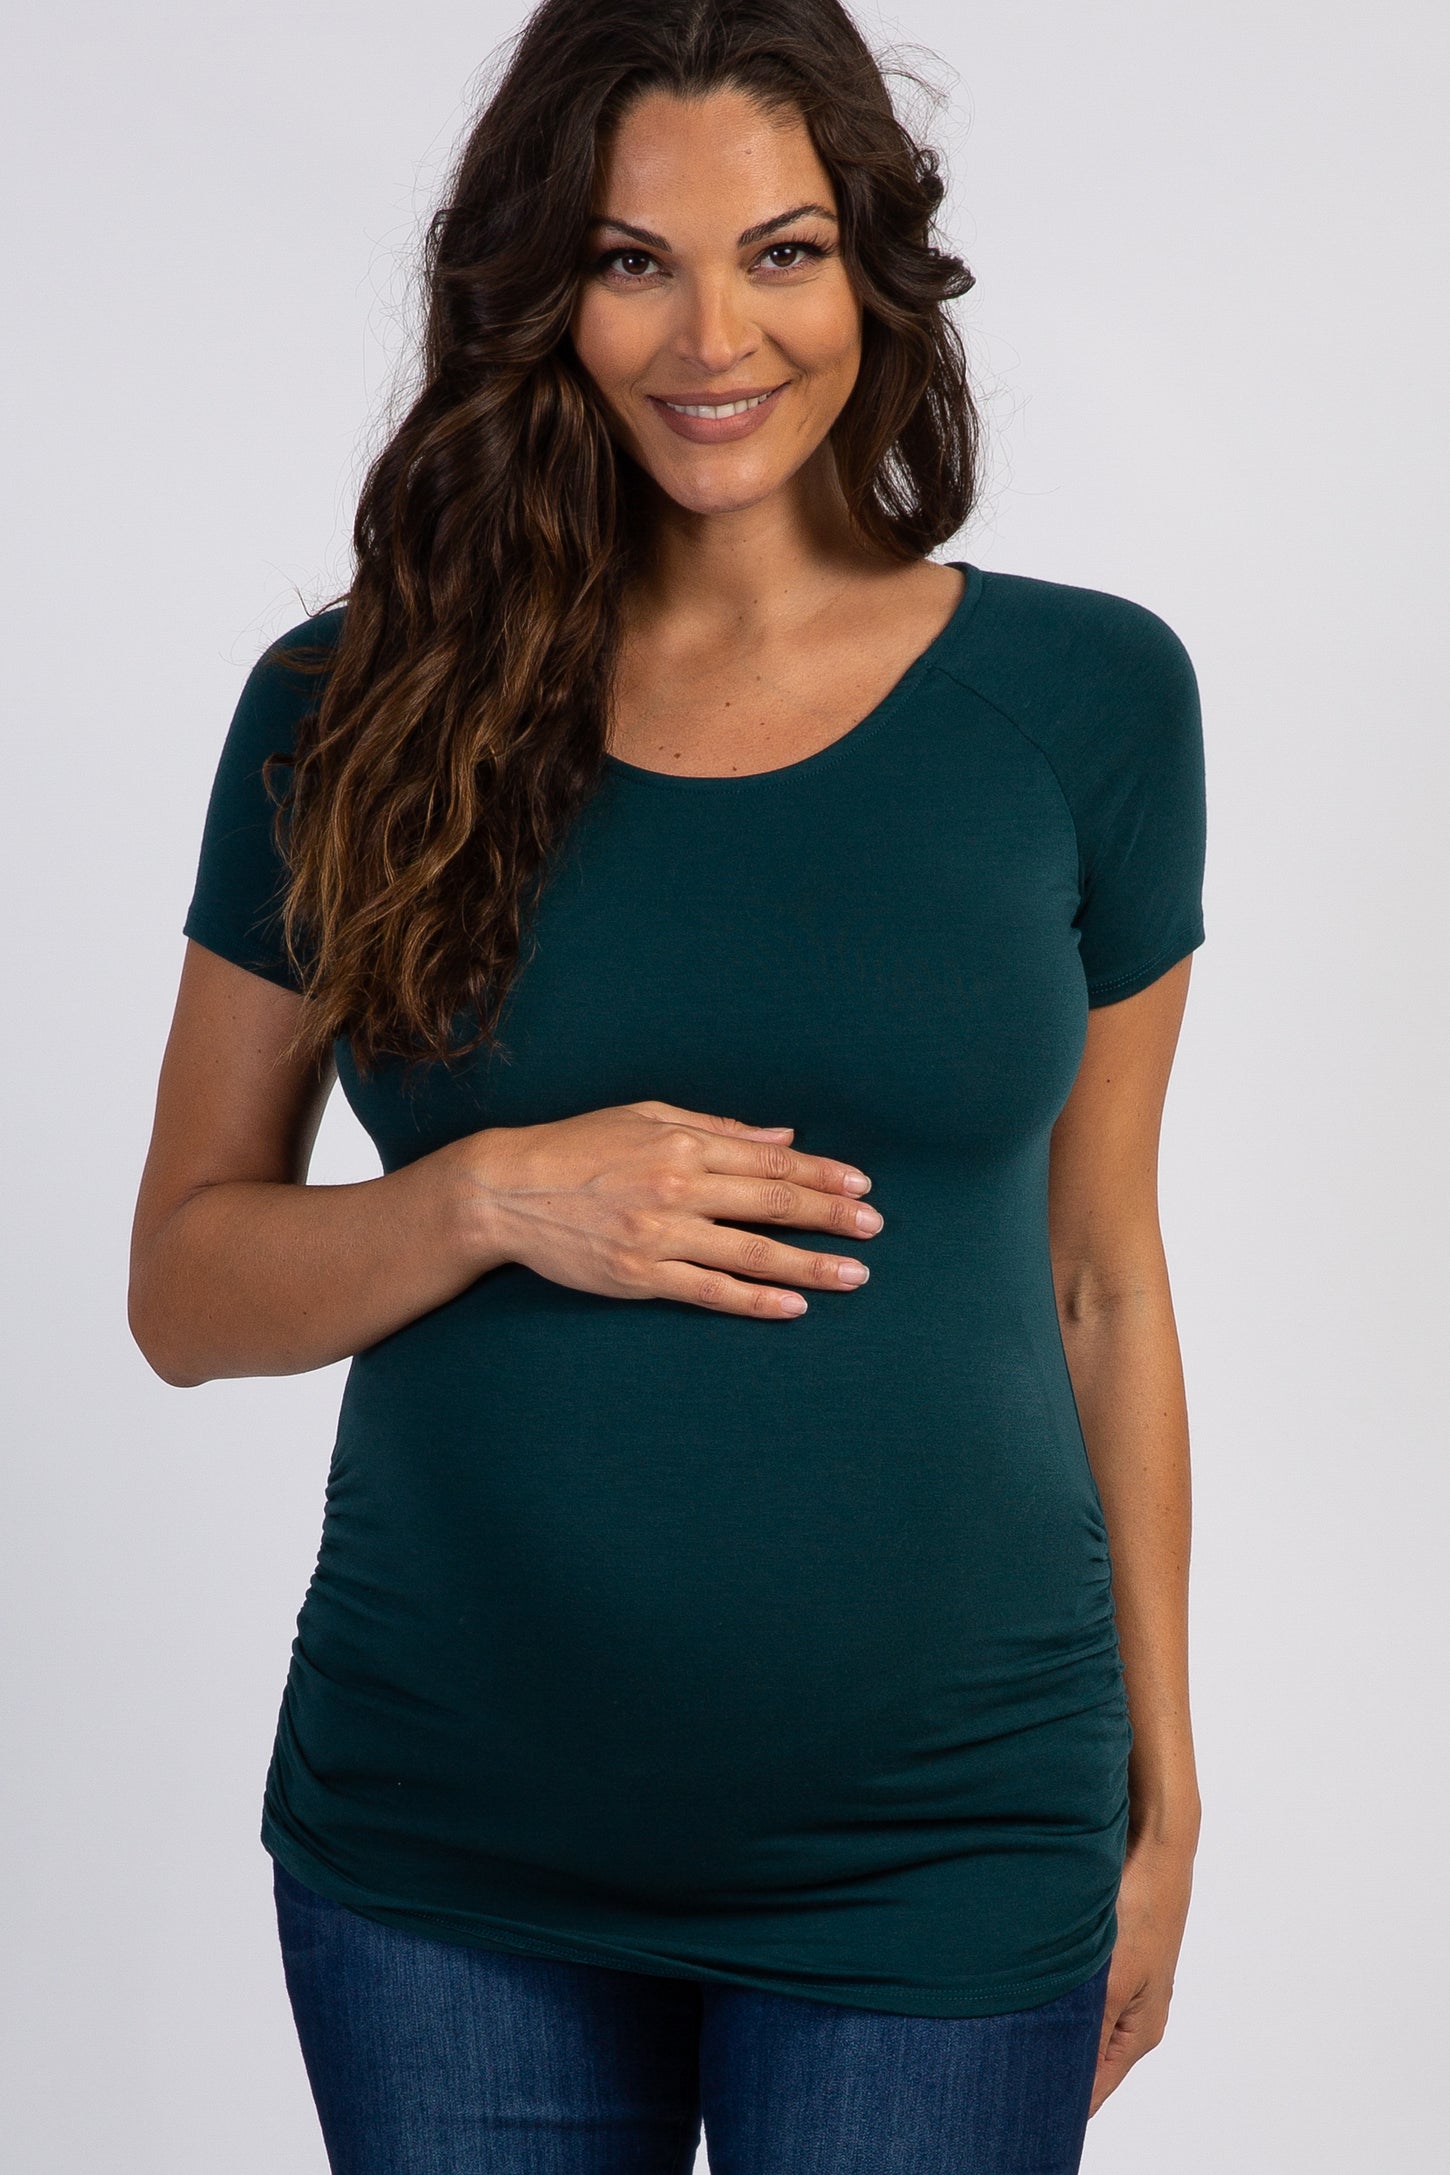 Forest Green Basic Fitted Short Sleeve Maternity Top– PinkBlush